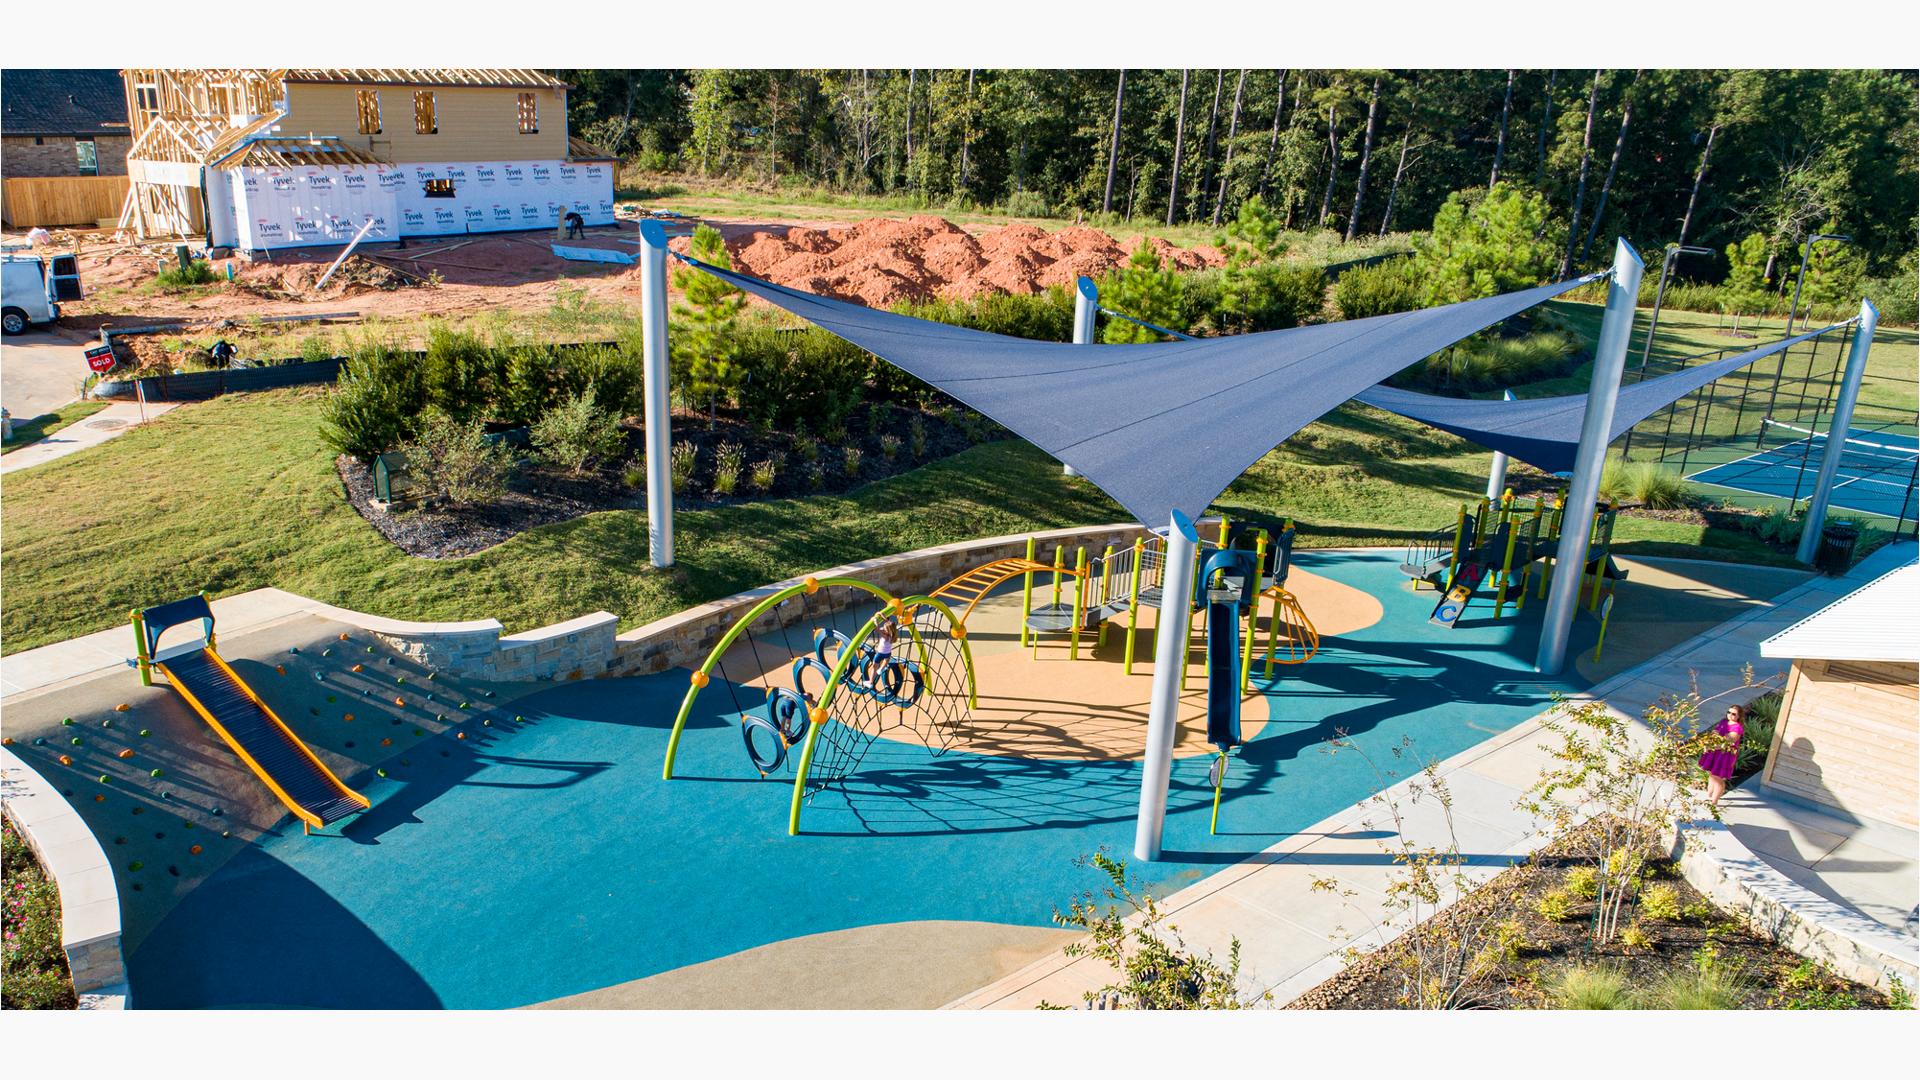 Large dark blue triangular shade sails stand over two separate play structures of a play area. In the background is a construction site of neighborhood homes.